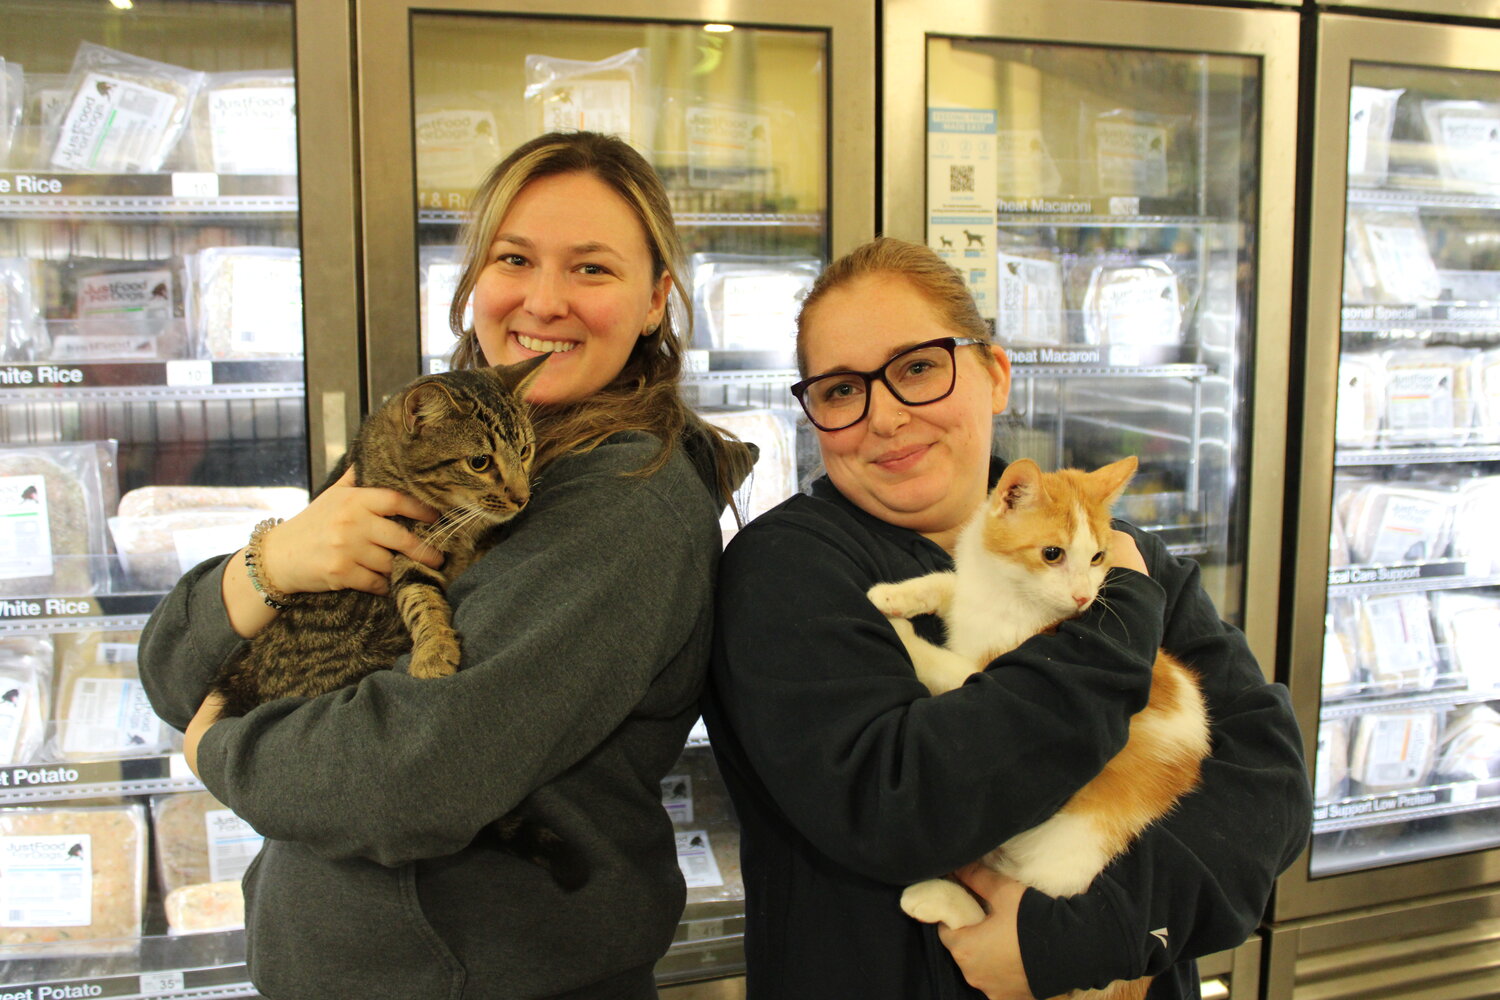 Volunteer organizers Jordyn Valente, 30, and Ally Tyrell, 25, with Fin and Rosco, two 8-month-old cats that are looking for new homes.